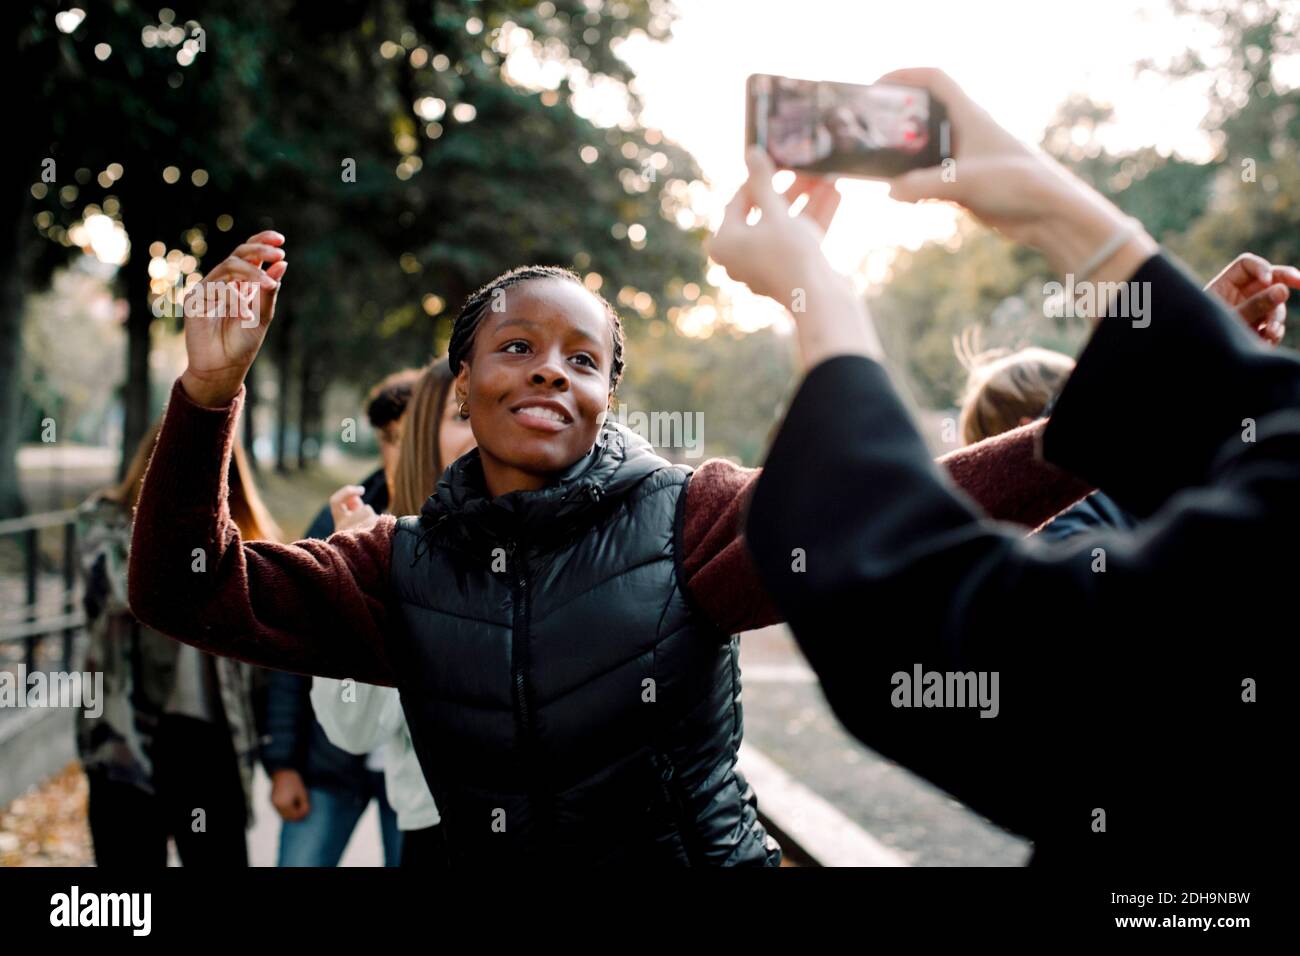 Cropped hands of woman filming teenage girl dancing on street in city Stock Photo